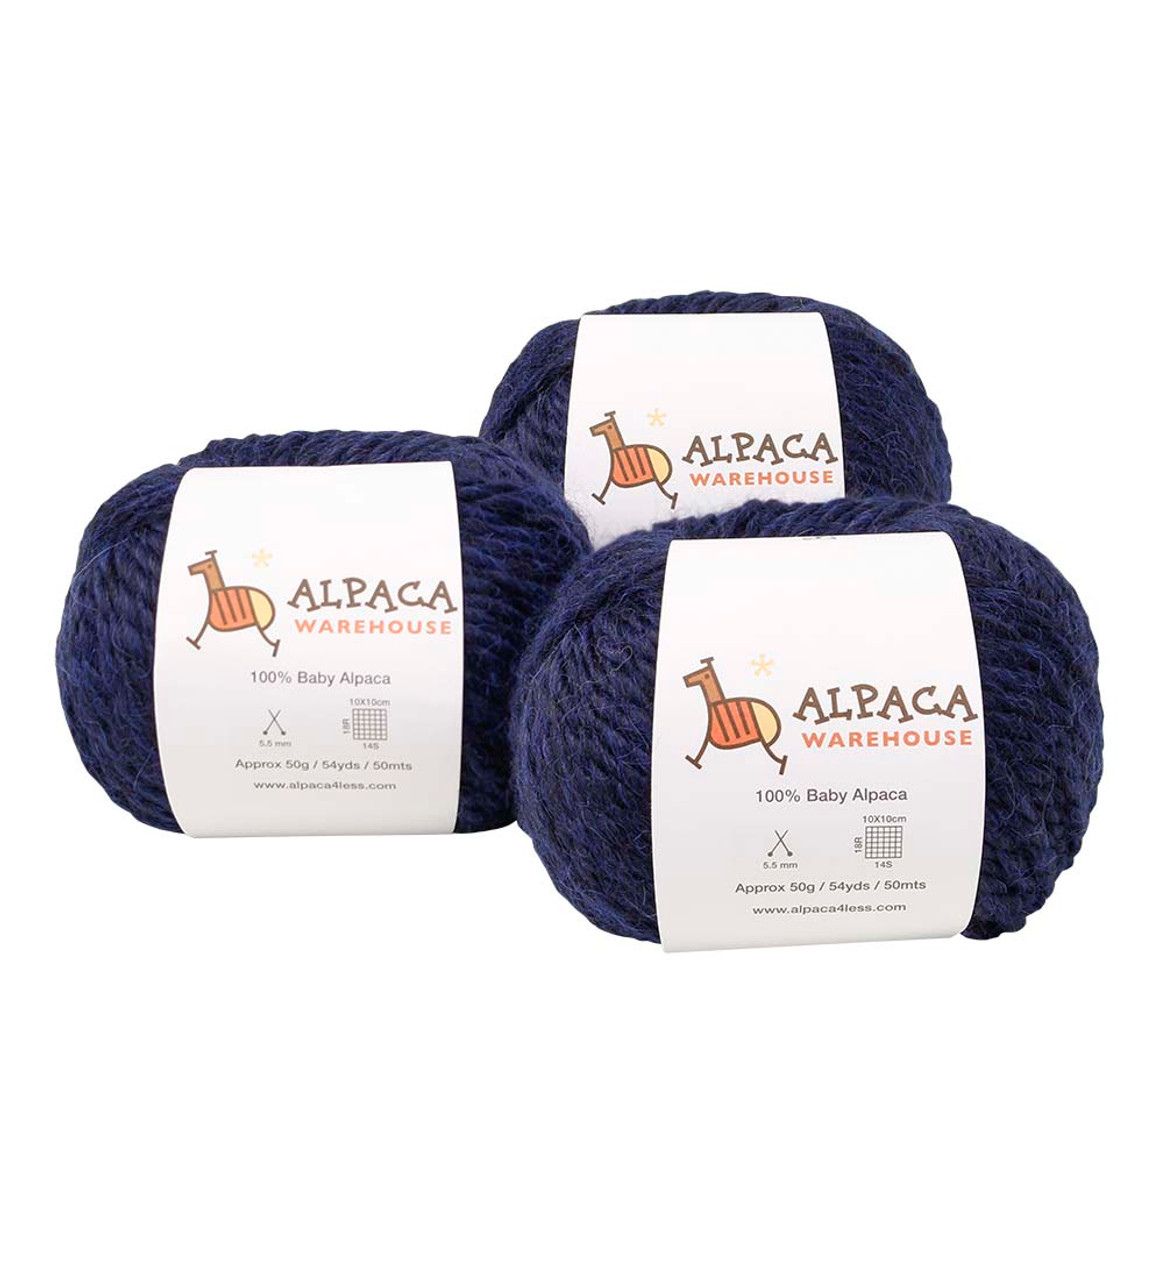 NEW-Alpaca Blend Yarn (Weight #5) BULKY - SET OF 3 Skeins 150 GRAMS TOTAL  by AndeanSun - Llacta